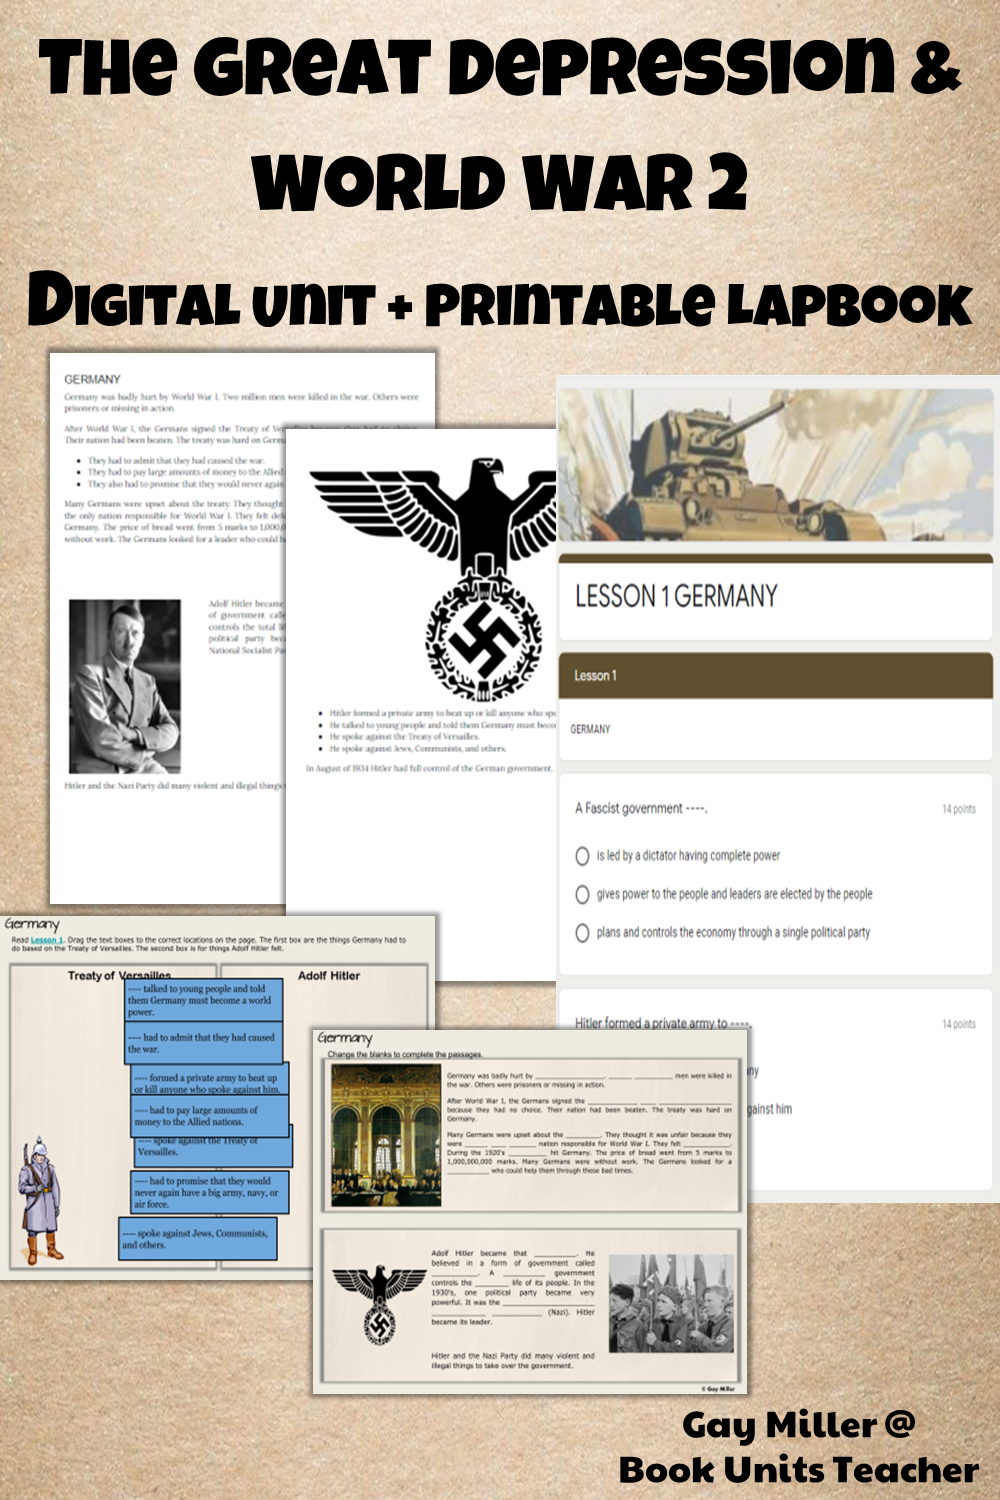 Purchase The Great Depression + World War II Digital Unit on Teachers Pay Teachers. This activity is great for upper elementary including 4th, 5th, and 6th graders.